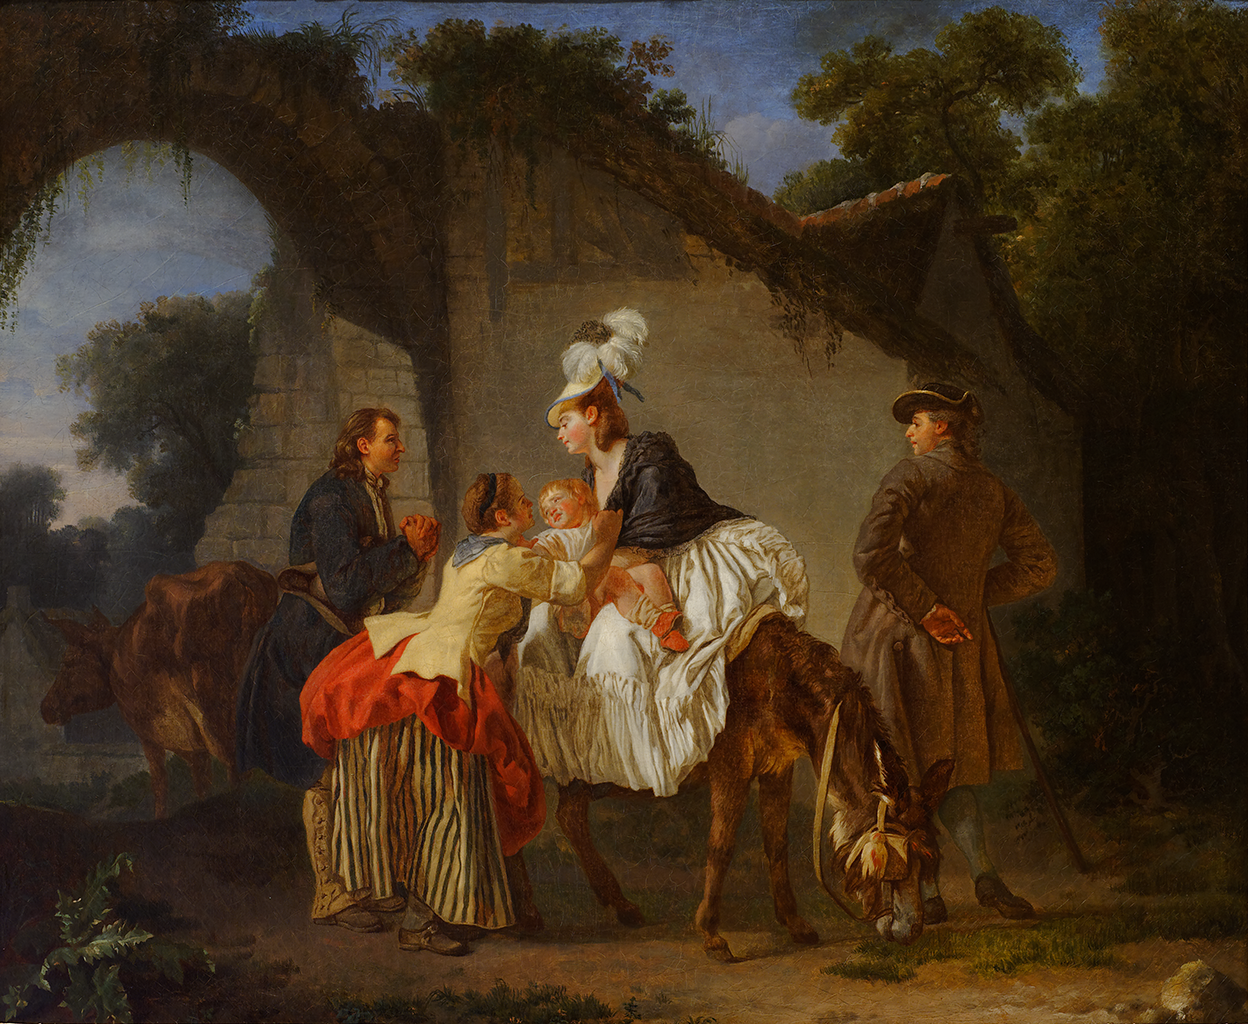 A painting depicting a woman wearing a white hat, black blouse, and a large white dress. She rides on top of a brown horse and has a child on her lap. Another woman wearing a yellow and red dress reached out to hold the child. Behind the horse are two men one wearing a gray coat while another one wears a blue one. They are all under an old archway with overgrowth covering it.